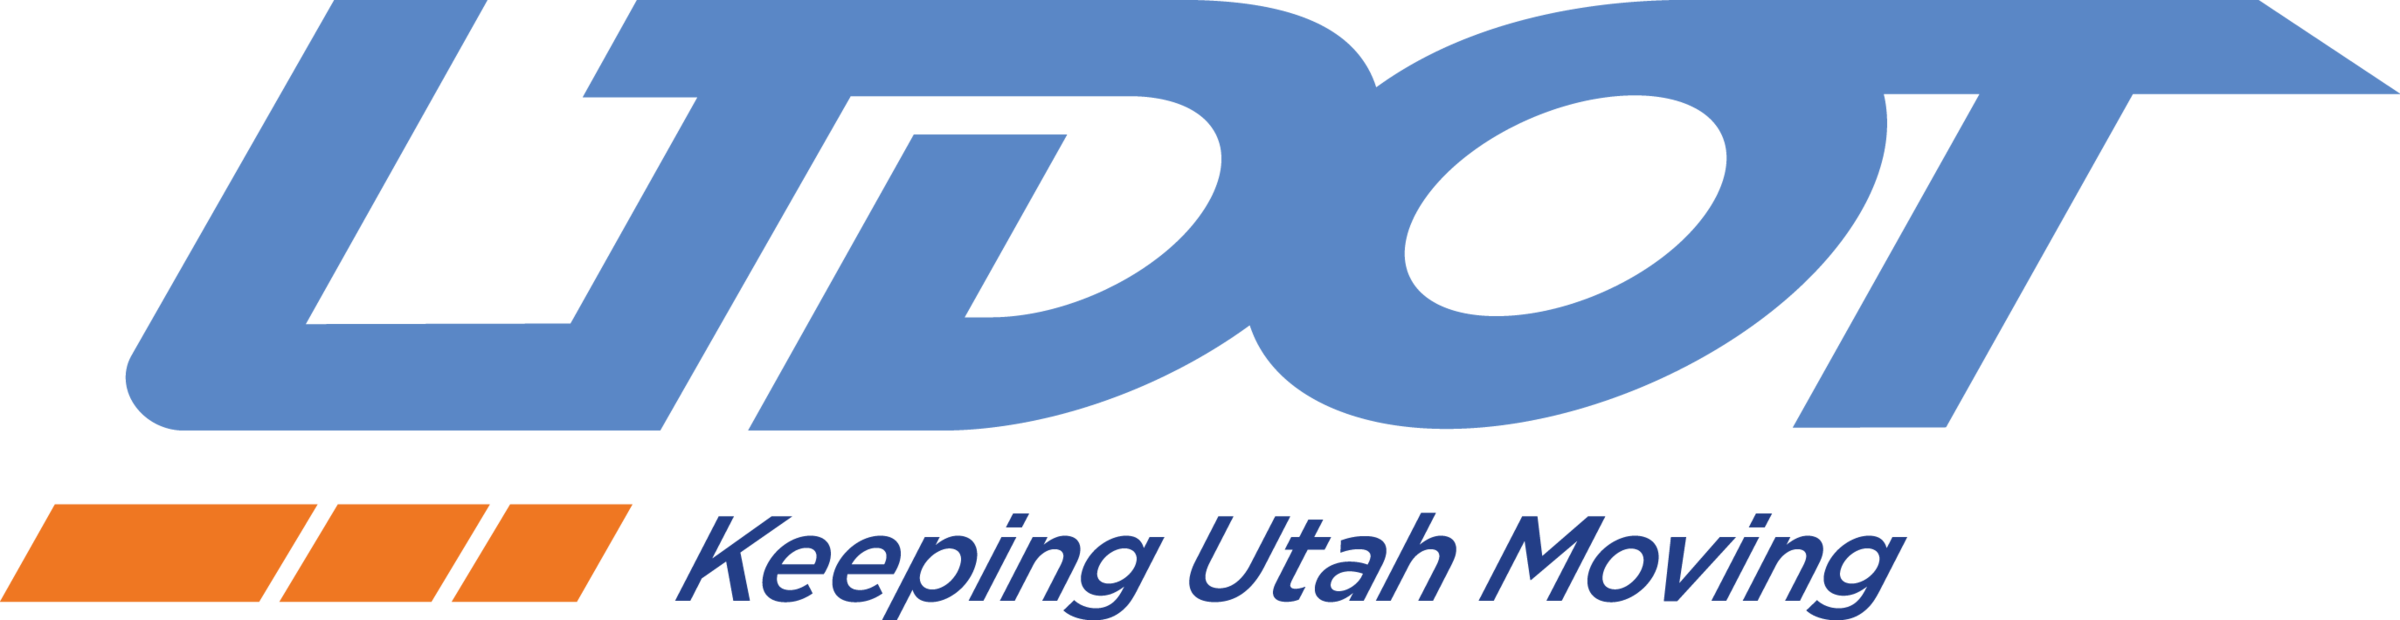 Utah Department of Transportation Announces Its First Online Auction for 2022; SVN Auction Services to Coordinate Online Auction